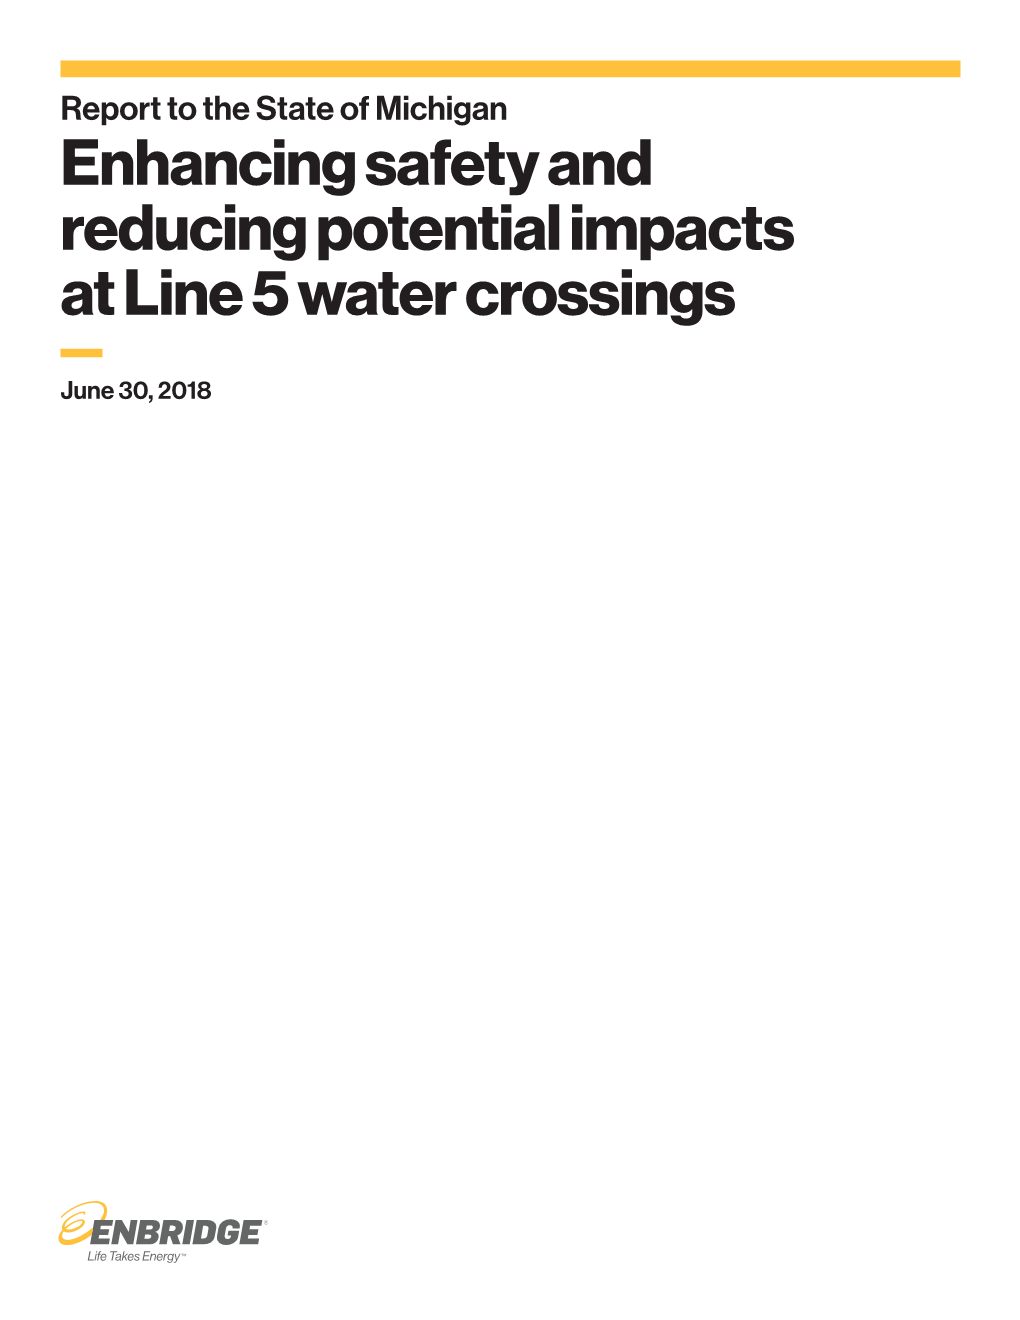 Enhancing Safety and Reducing Potential Impacts at Line 5 Water Crossings